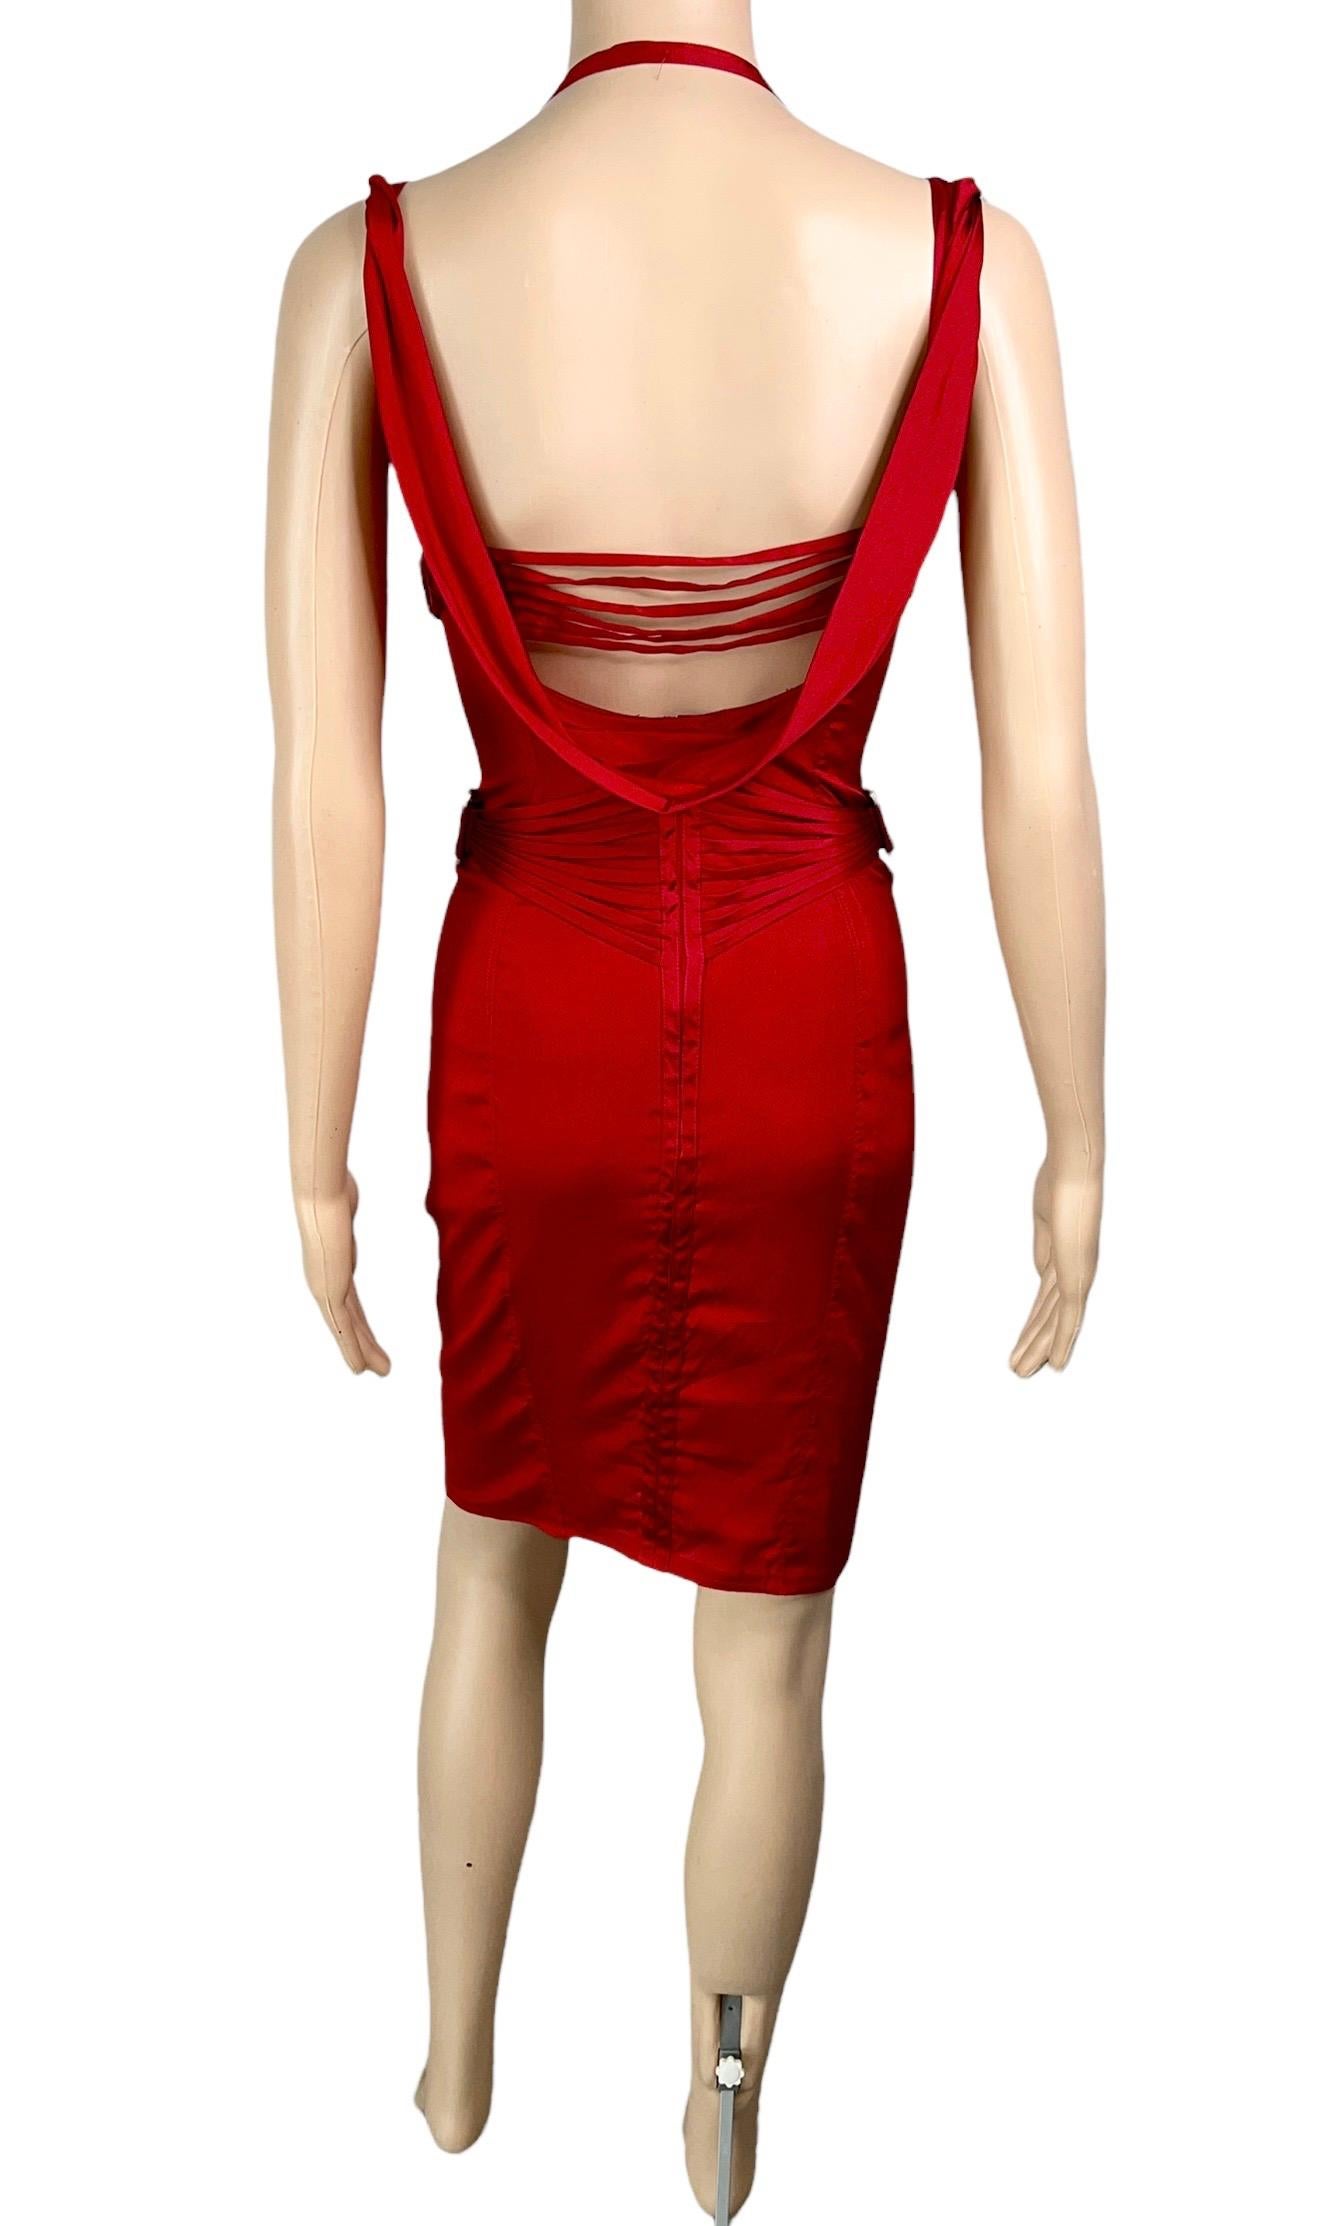 Tom Ford for Gucci F/W 2003 Runway Bustier Corset Silk Red Dress For Sale 4